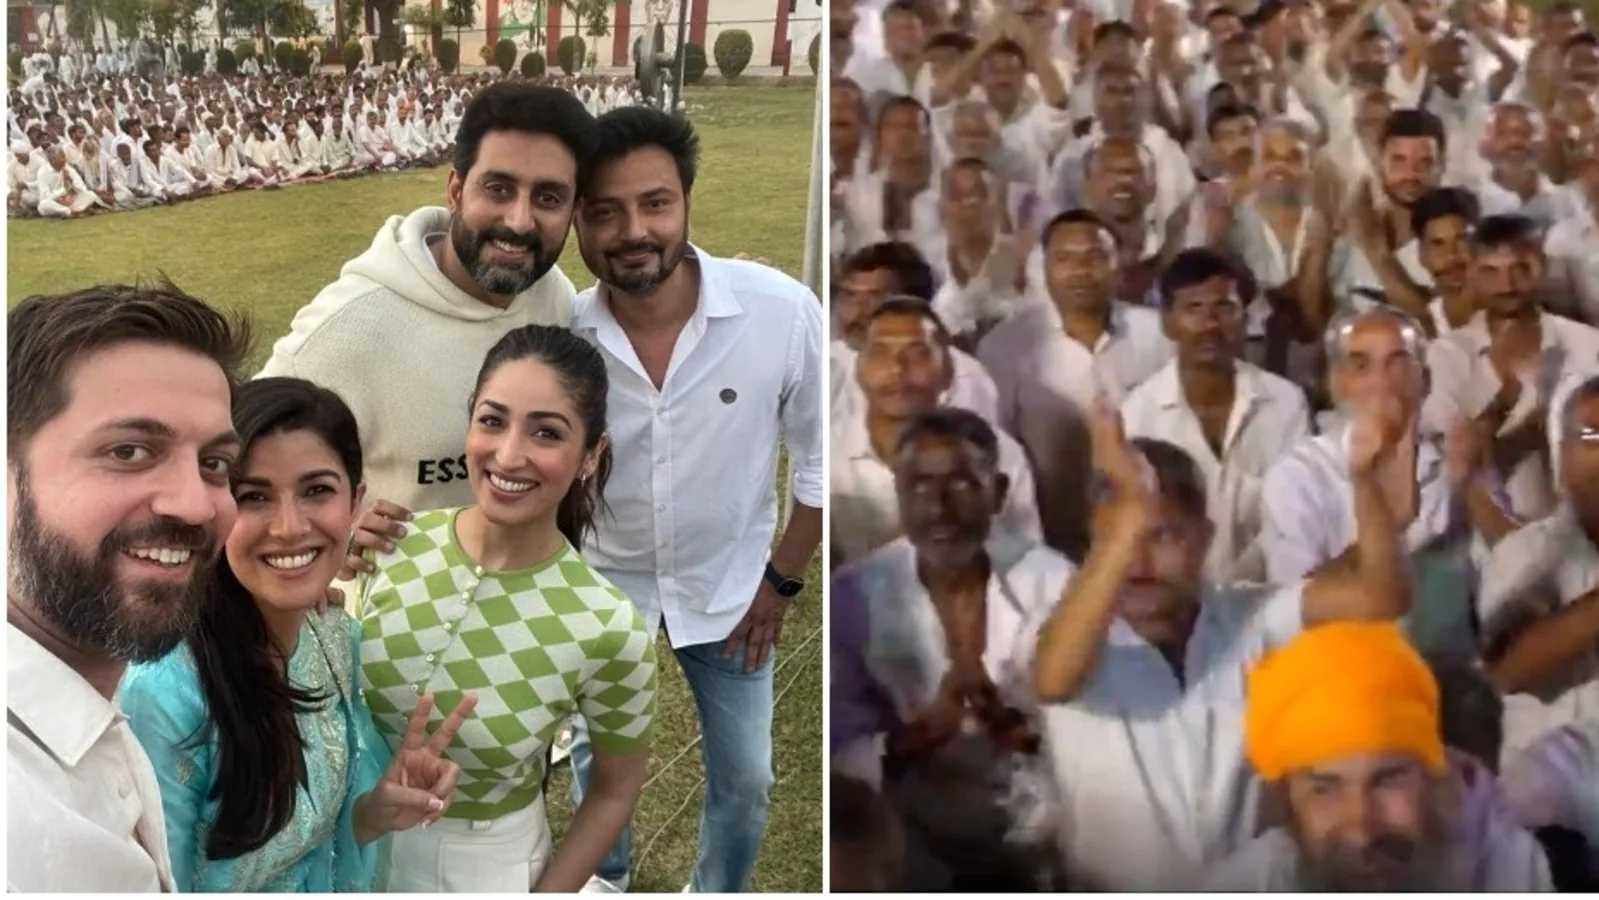 Abhishek Bachchan keeps his promise, screens Dasvi for inmates of Agra Central Jail. Watch